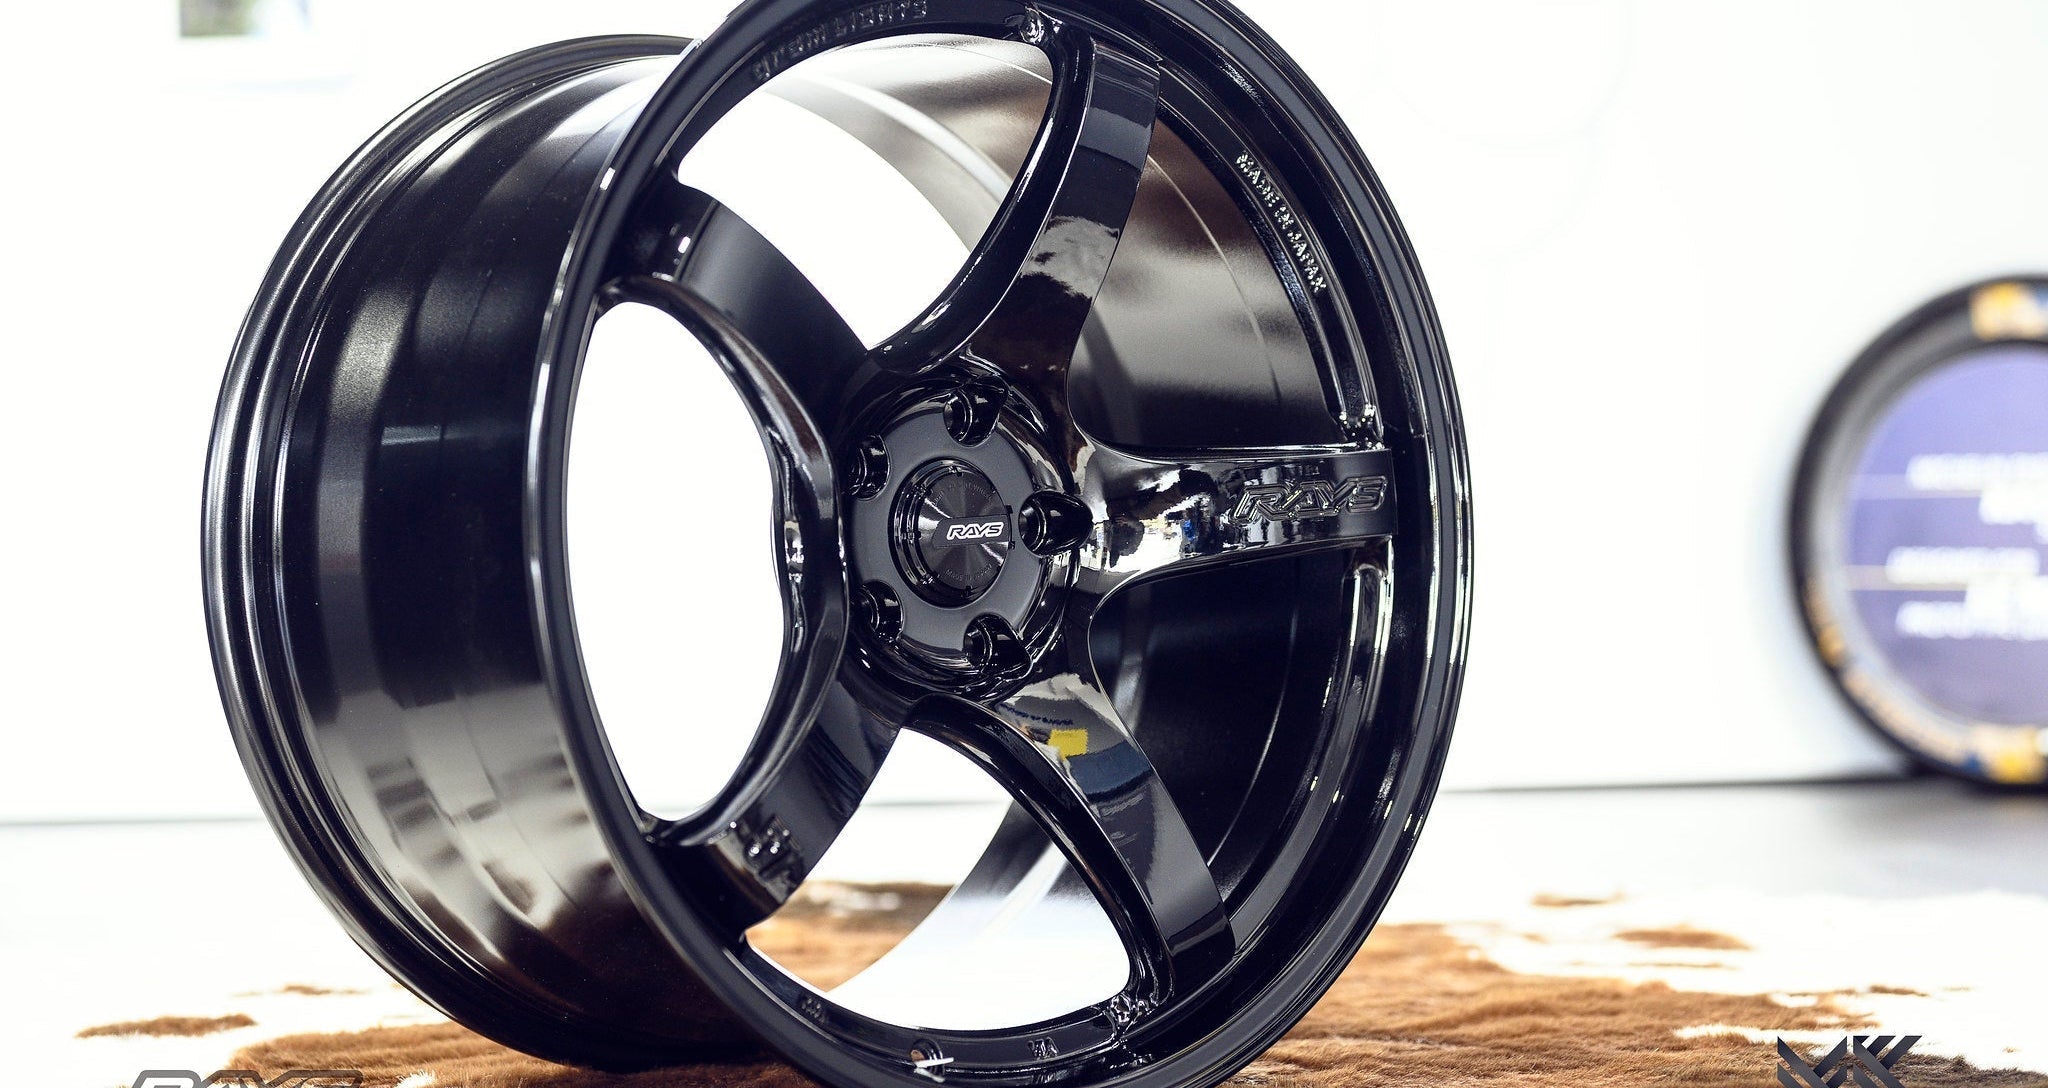 gramLIGHTS 57CR 18" - Premium Wheels from Gram Lights - From just $2390.00! Shop now at MK MOTORSPORTS